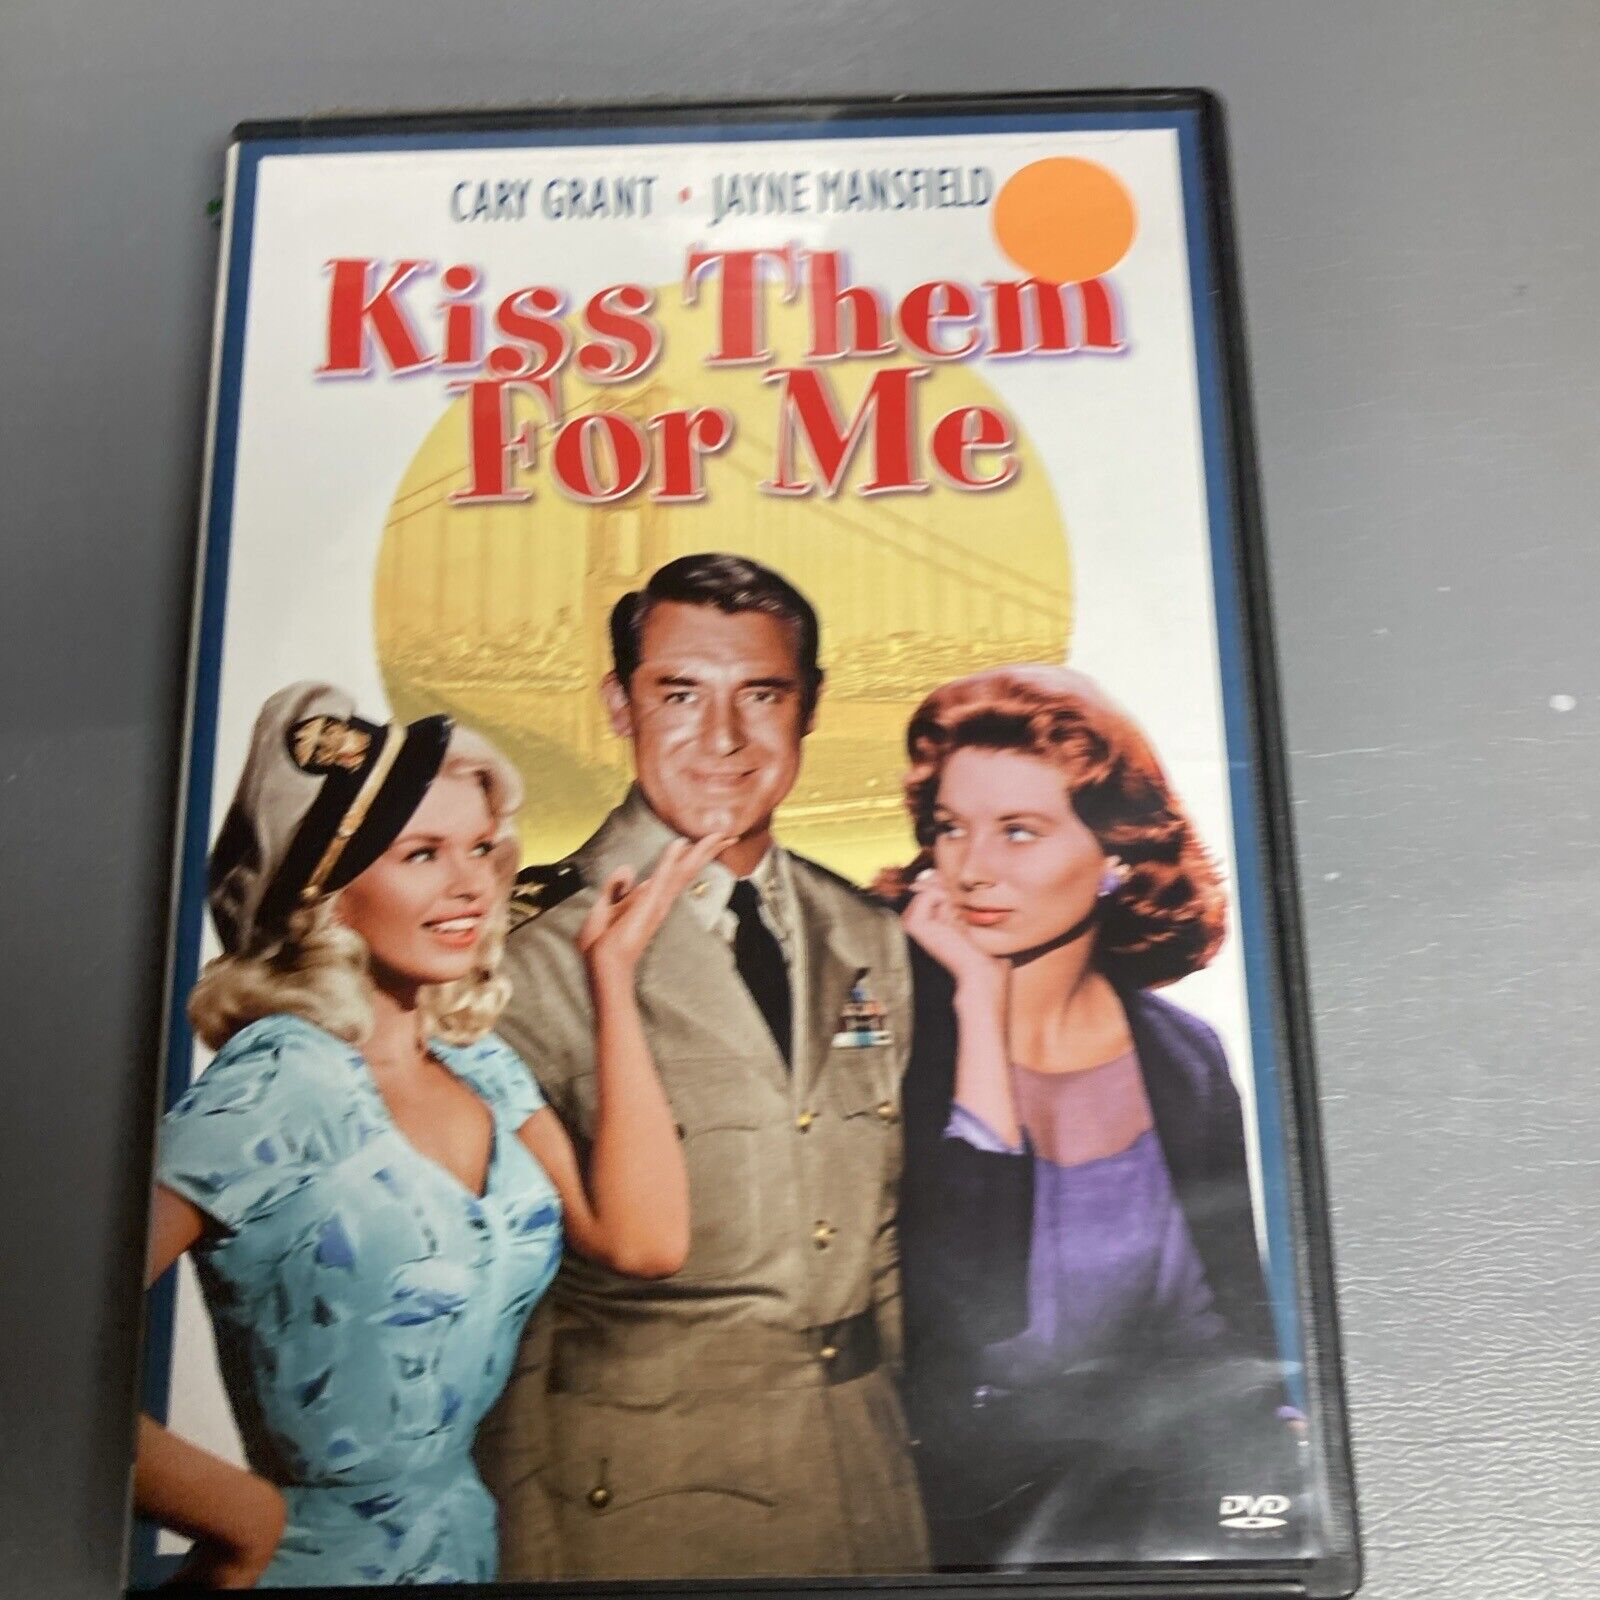 Kiss Them For Me (DVD, 2003) Cary Grant Jayne Mansfield